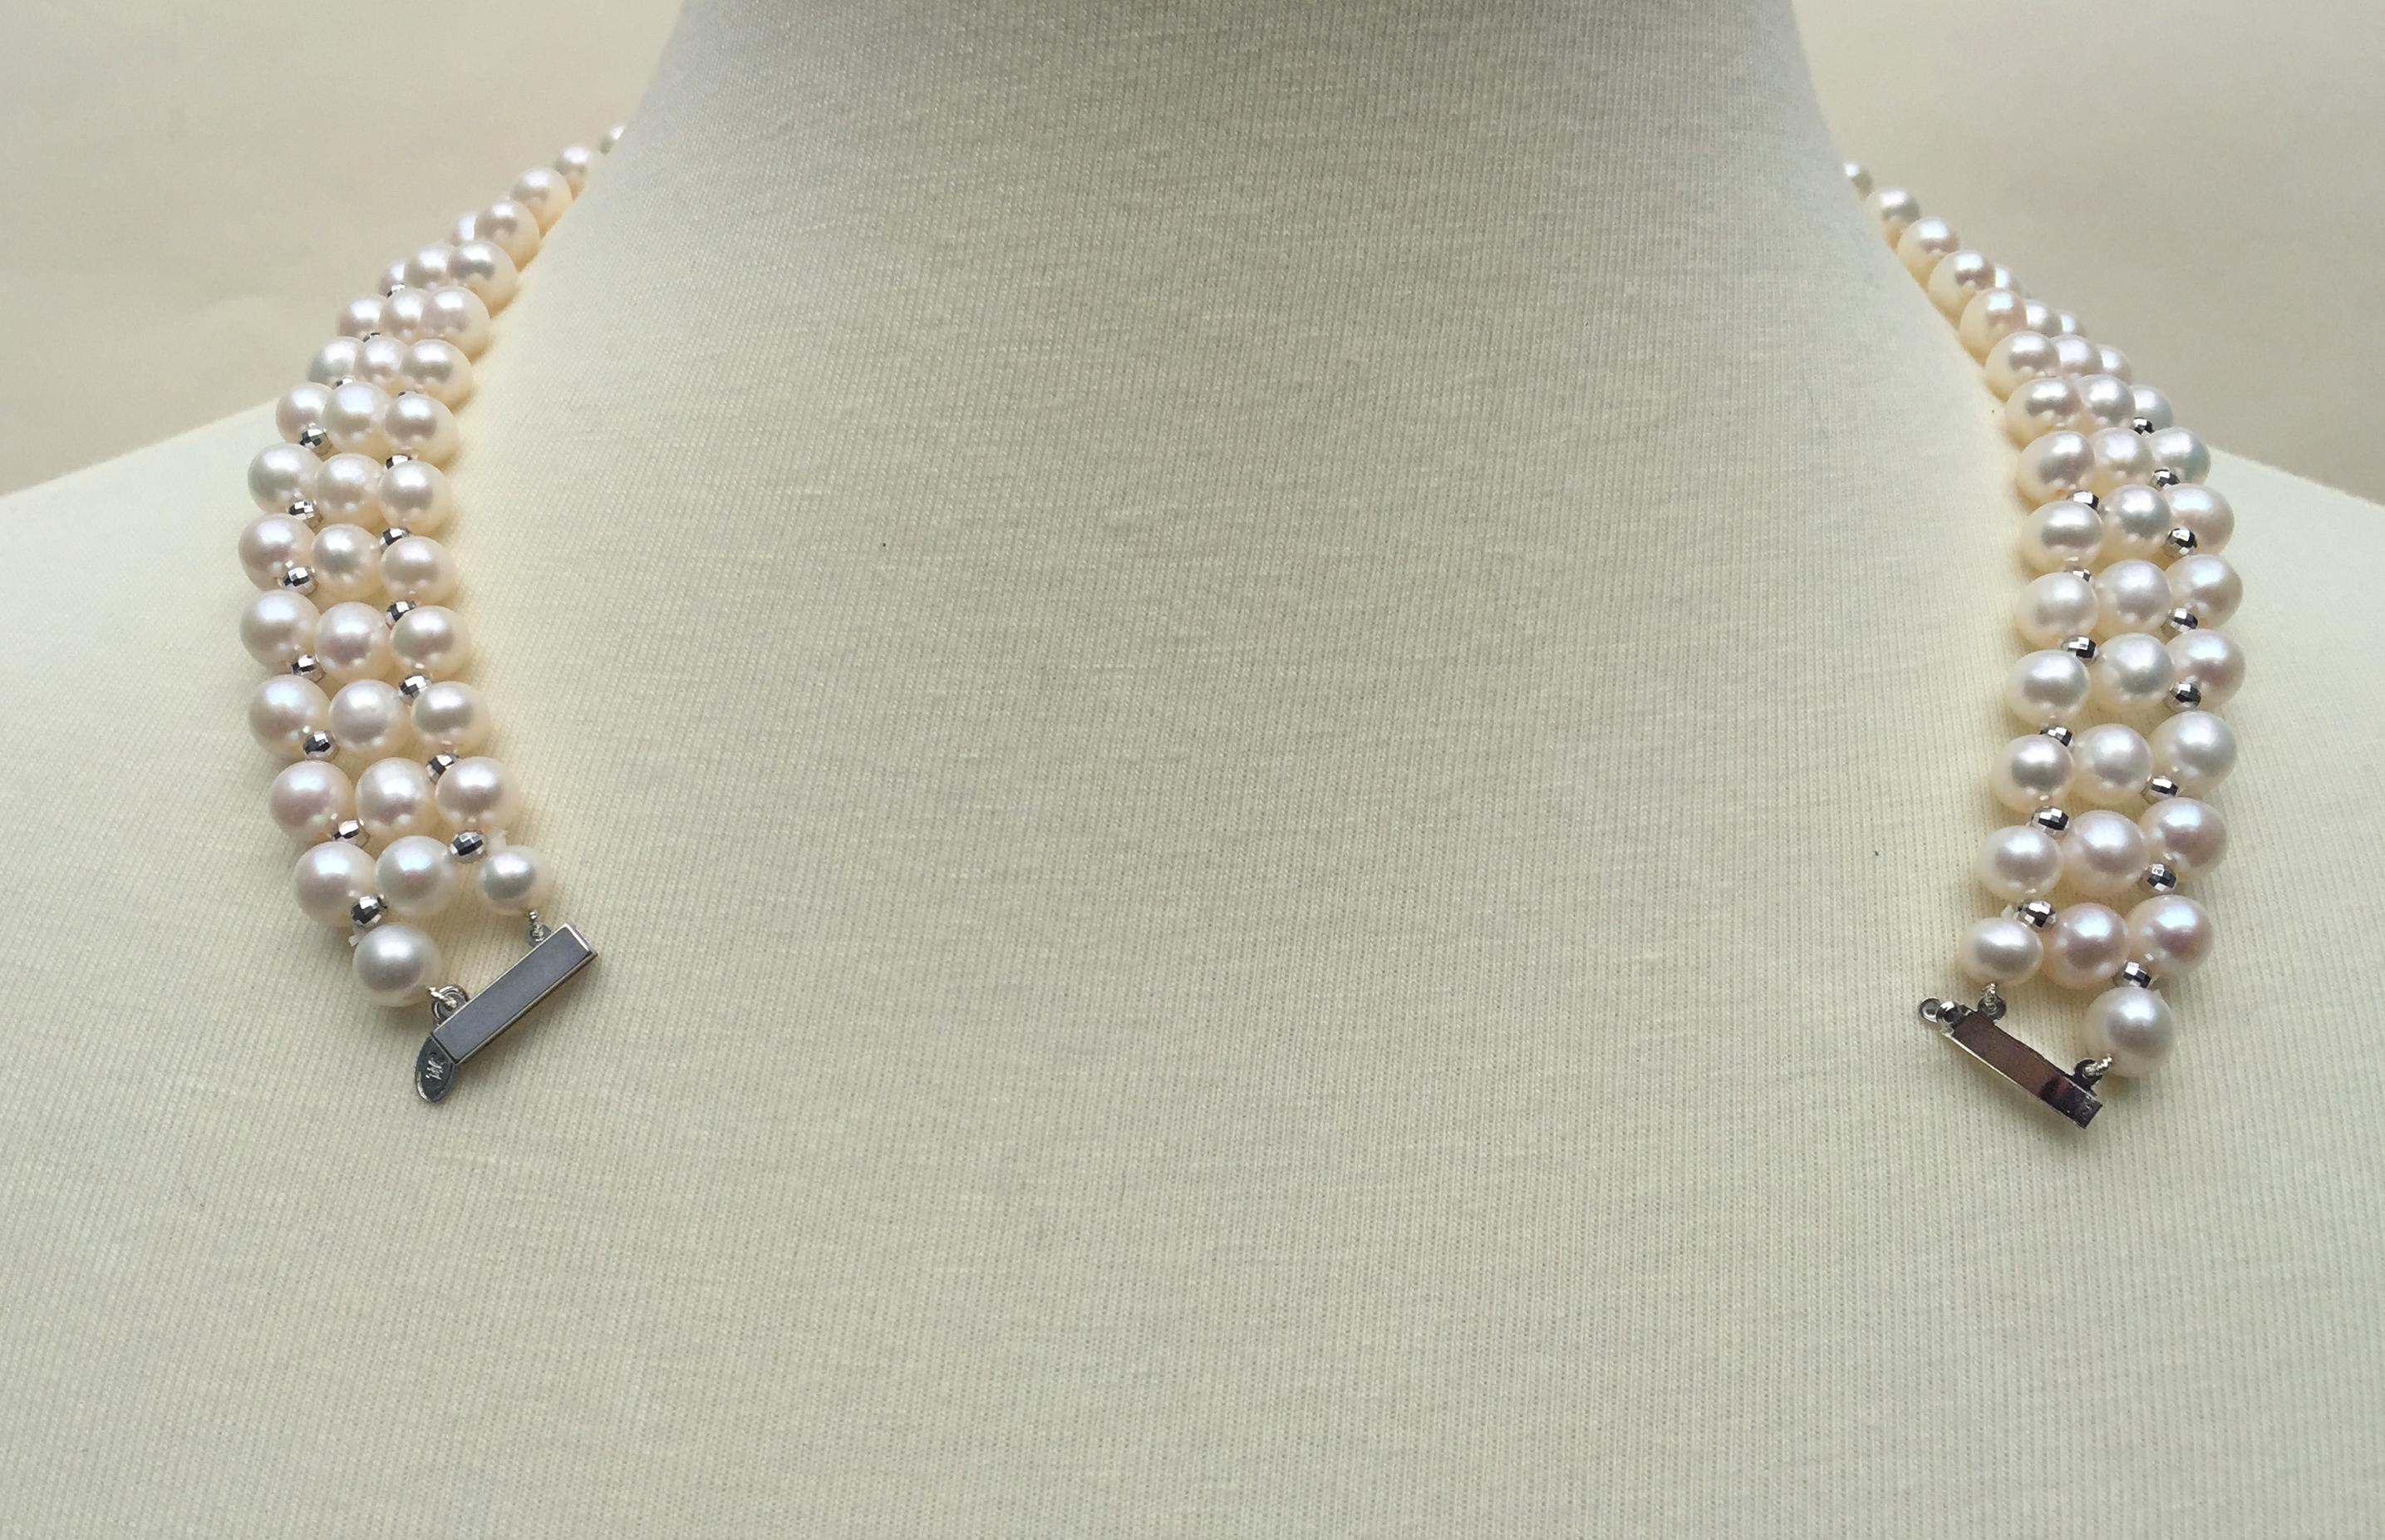 Artist Marina J Woven Pearl Necklace with 14 K White Gold Faceted Beads and Clasp For Sale